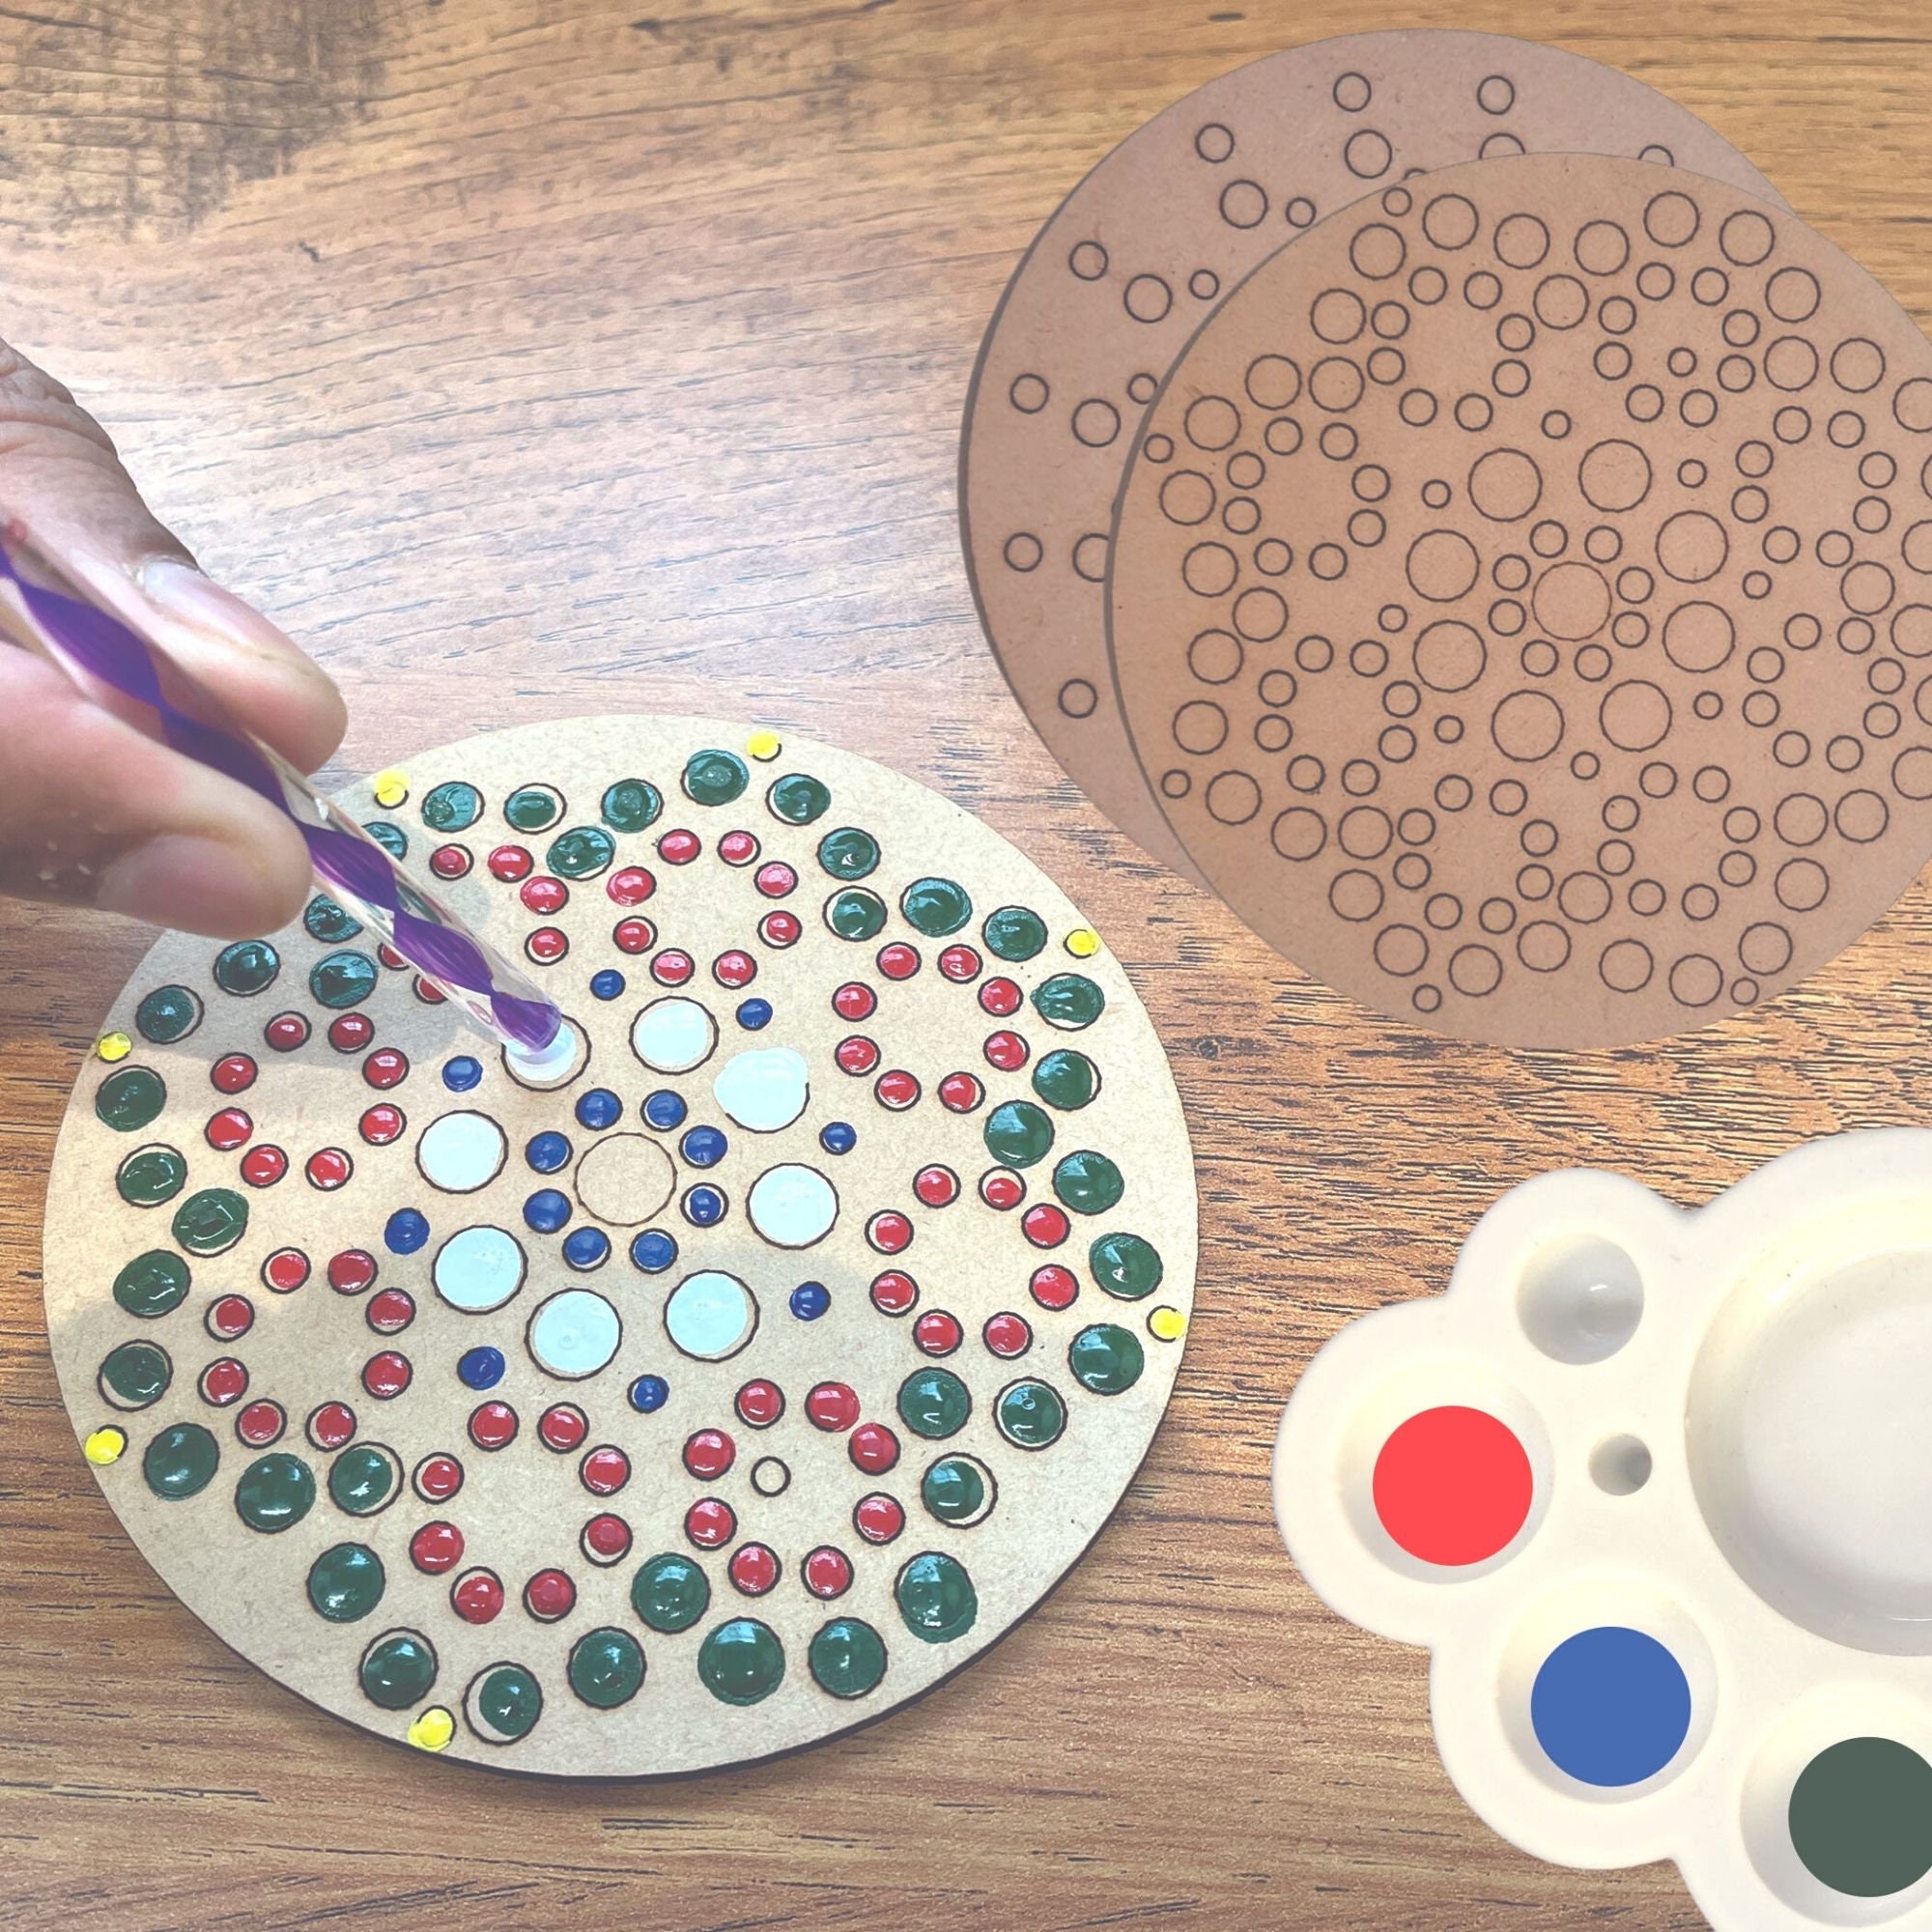 Mandala Art and Craft Kit With Mandala Art Tools Kit Gift for Girls 9-12  Age 12-14 Years Wooden Coasters With Acrylic Colours & Stand 